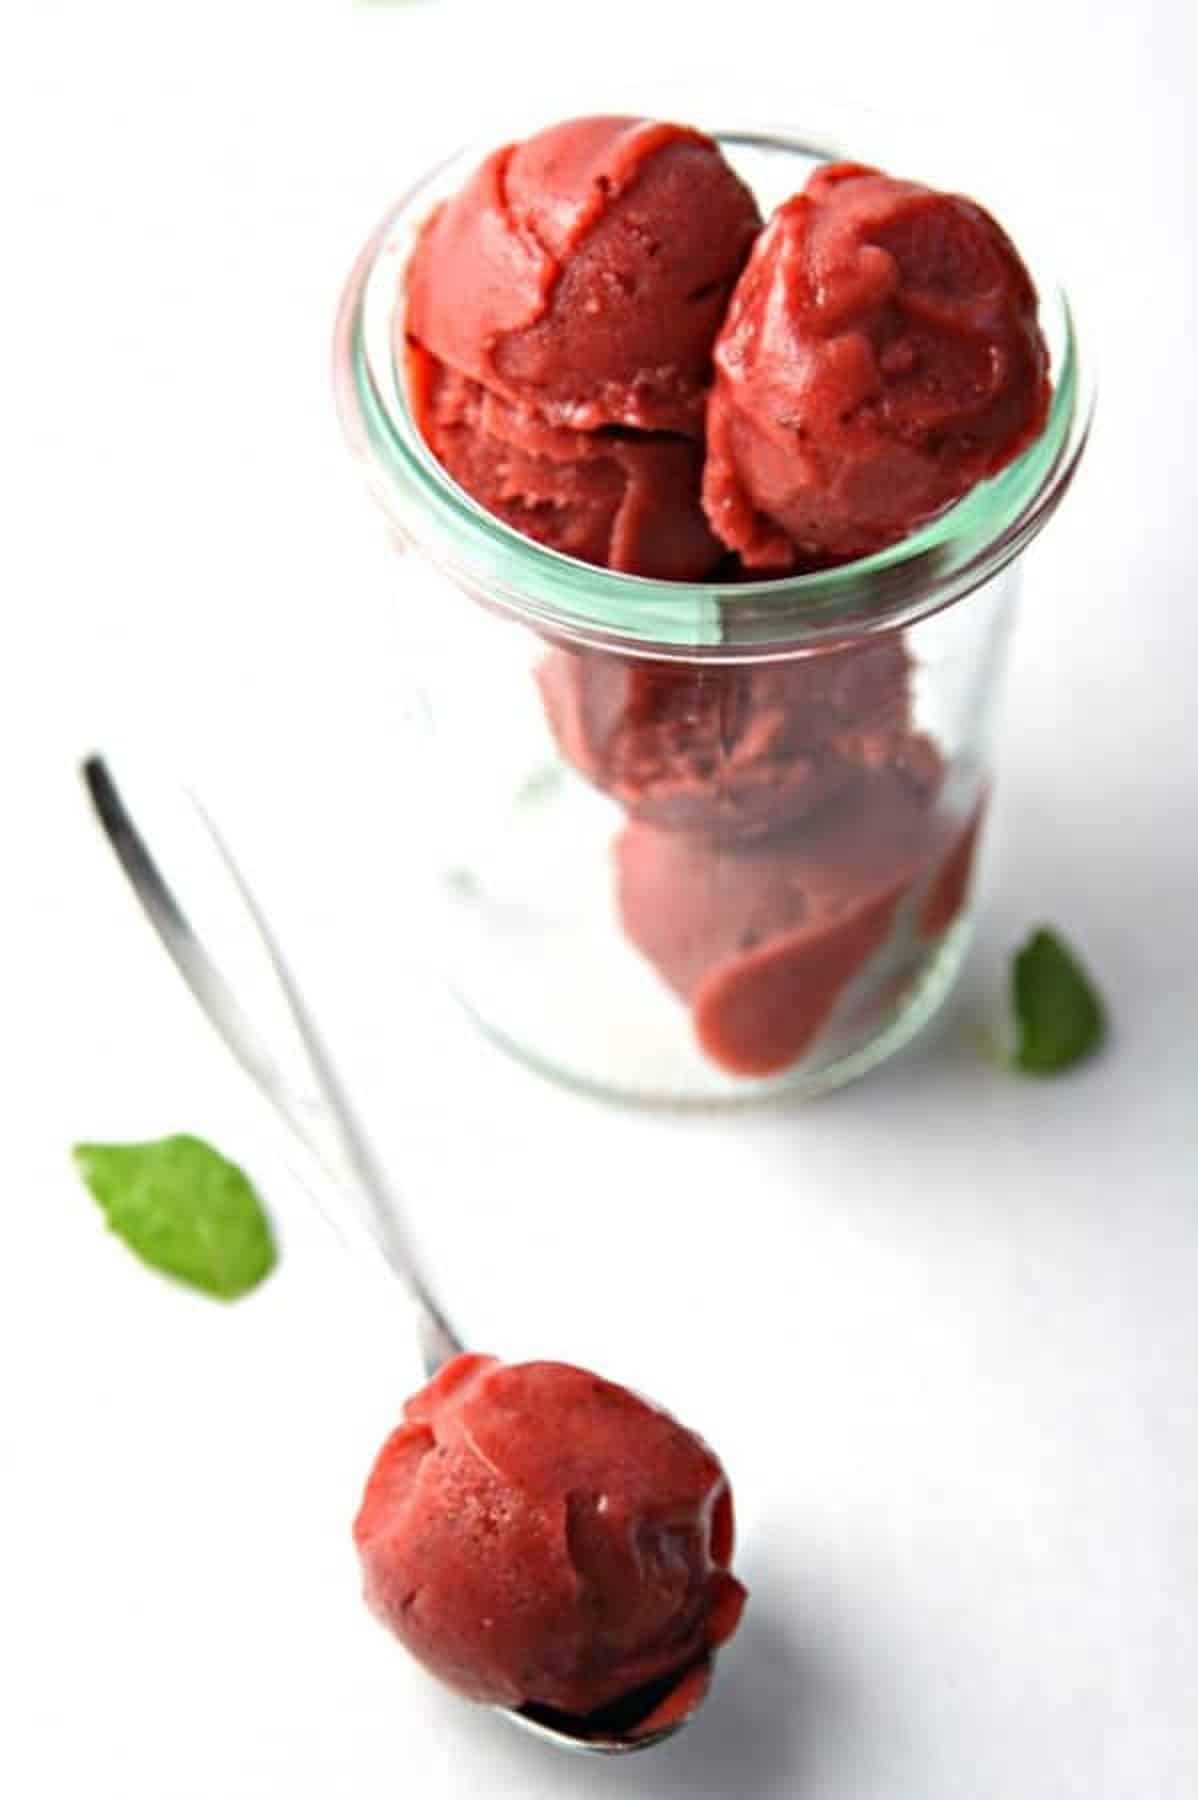 Balsamic Roasted Rhubarb Sorbet scooped into a clear glass.